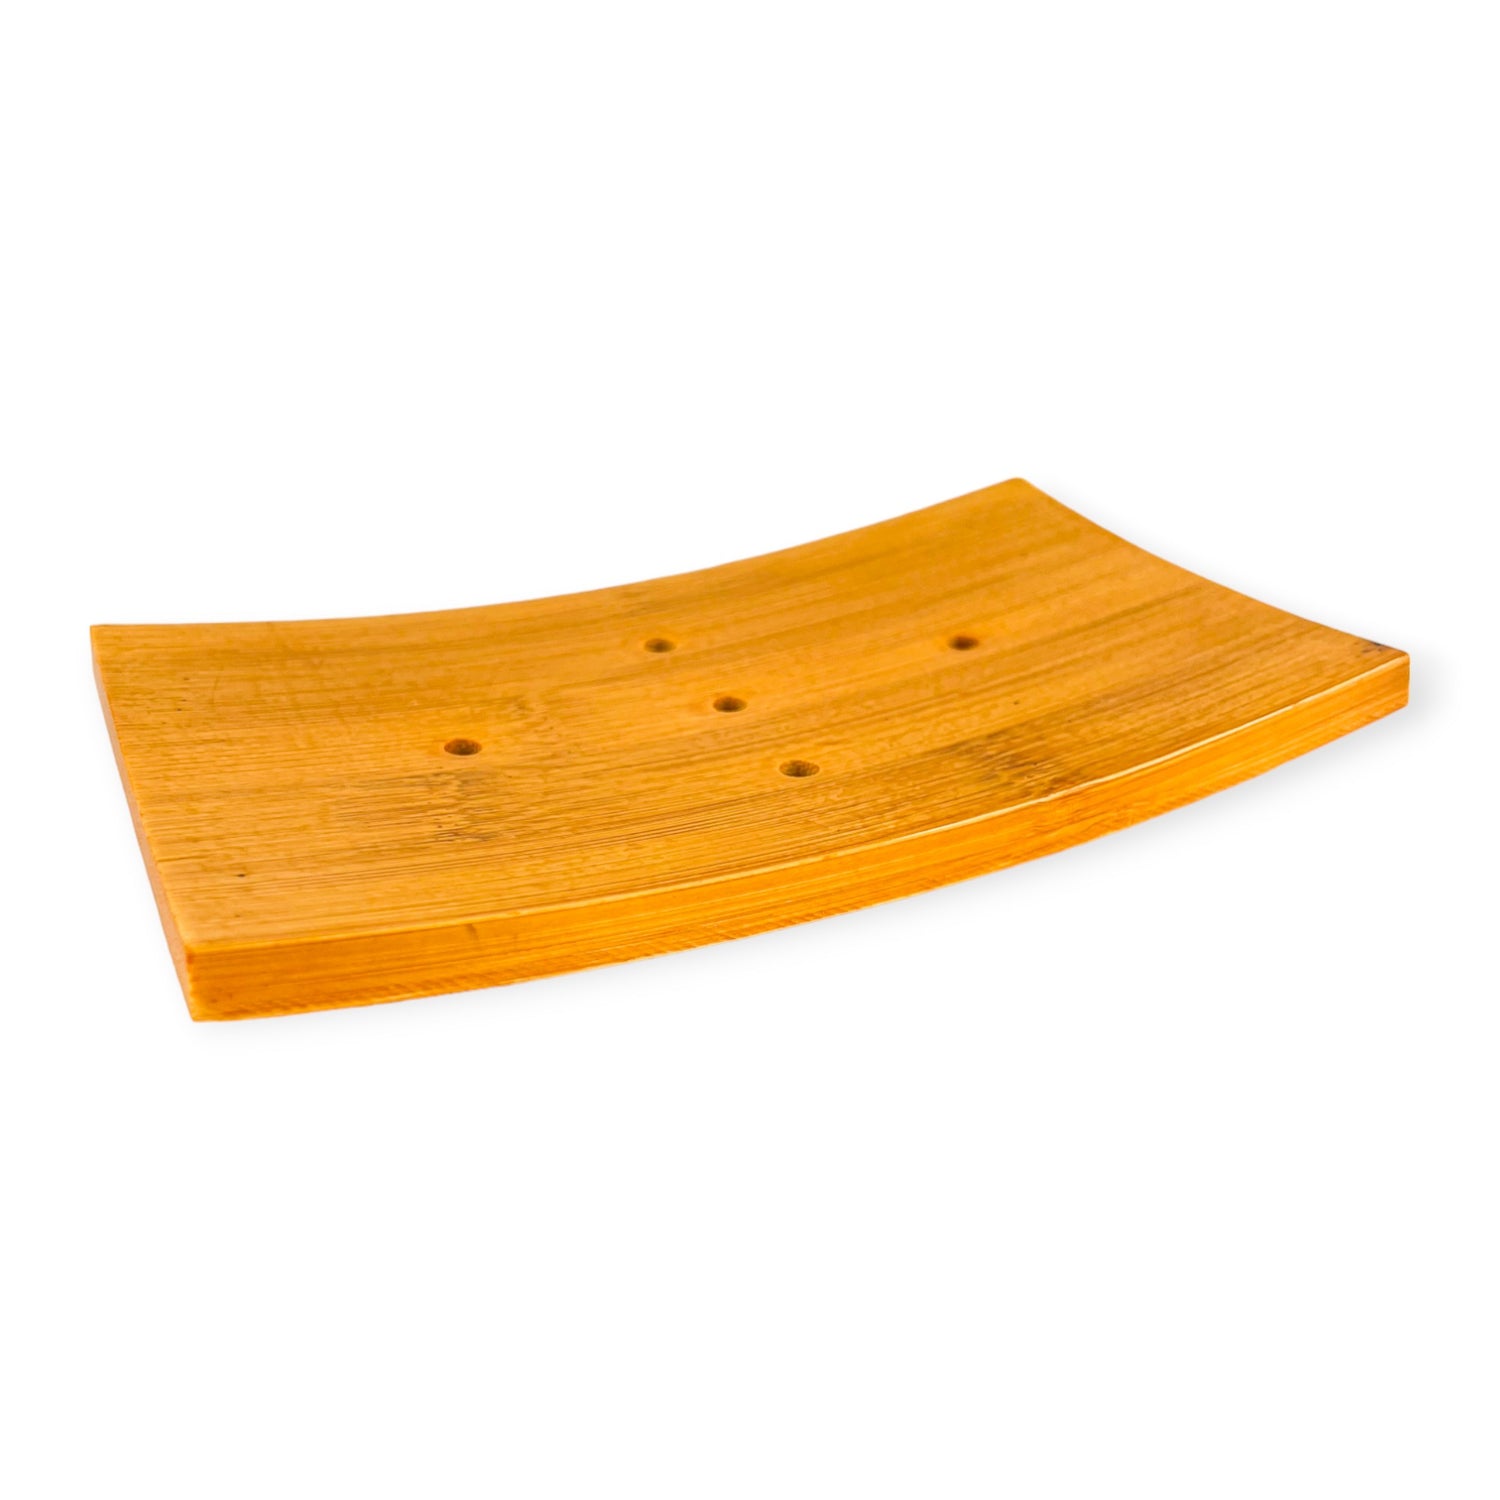 Curved Bamboo Soap Dish - Old Town Soap Co.